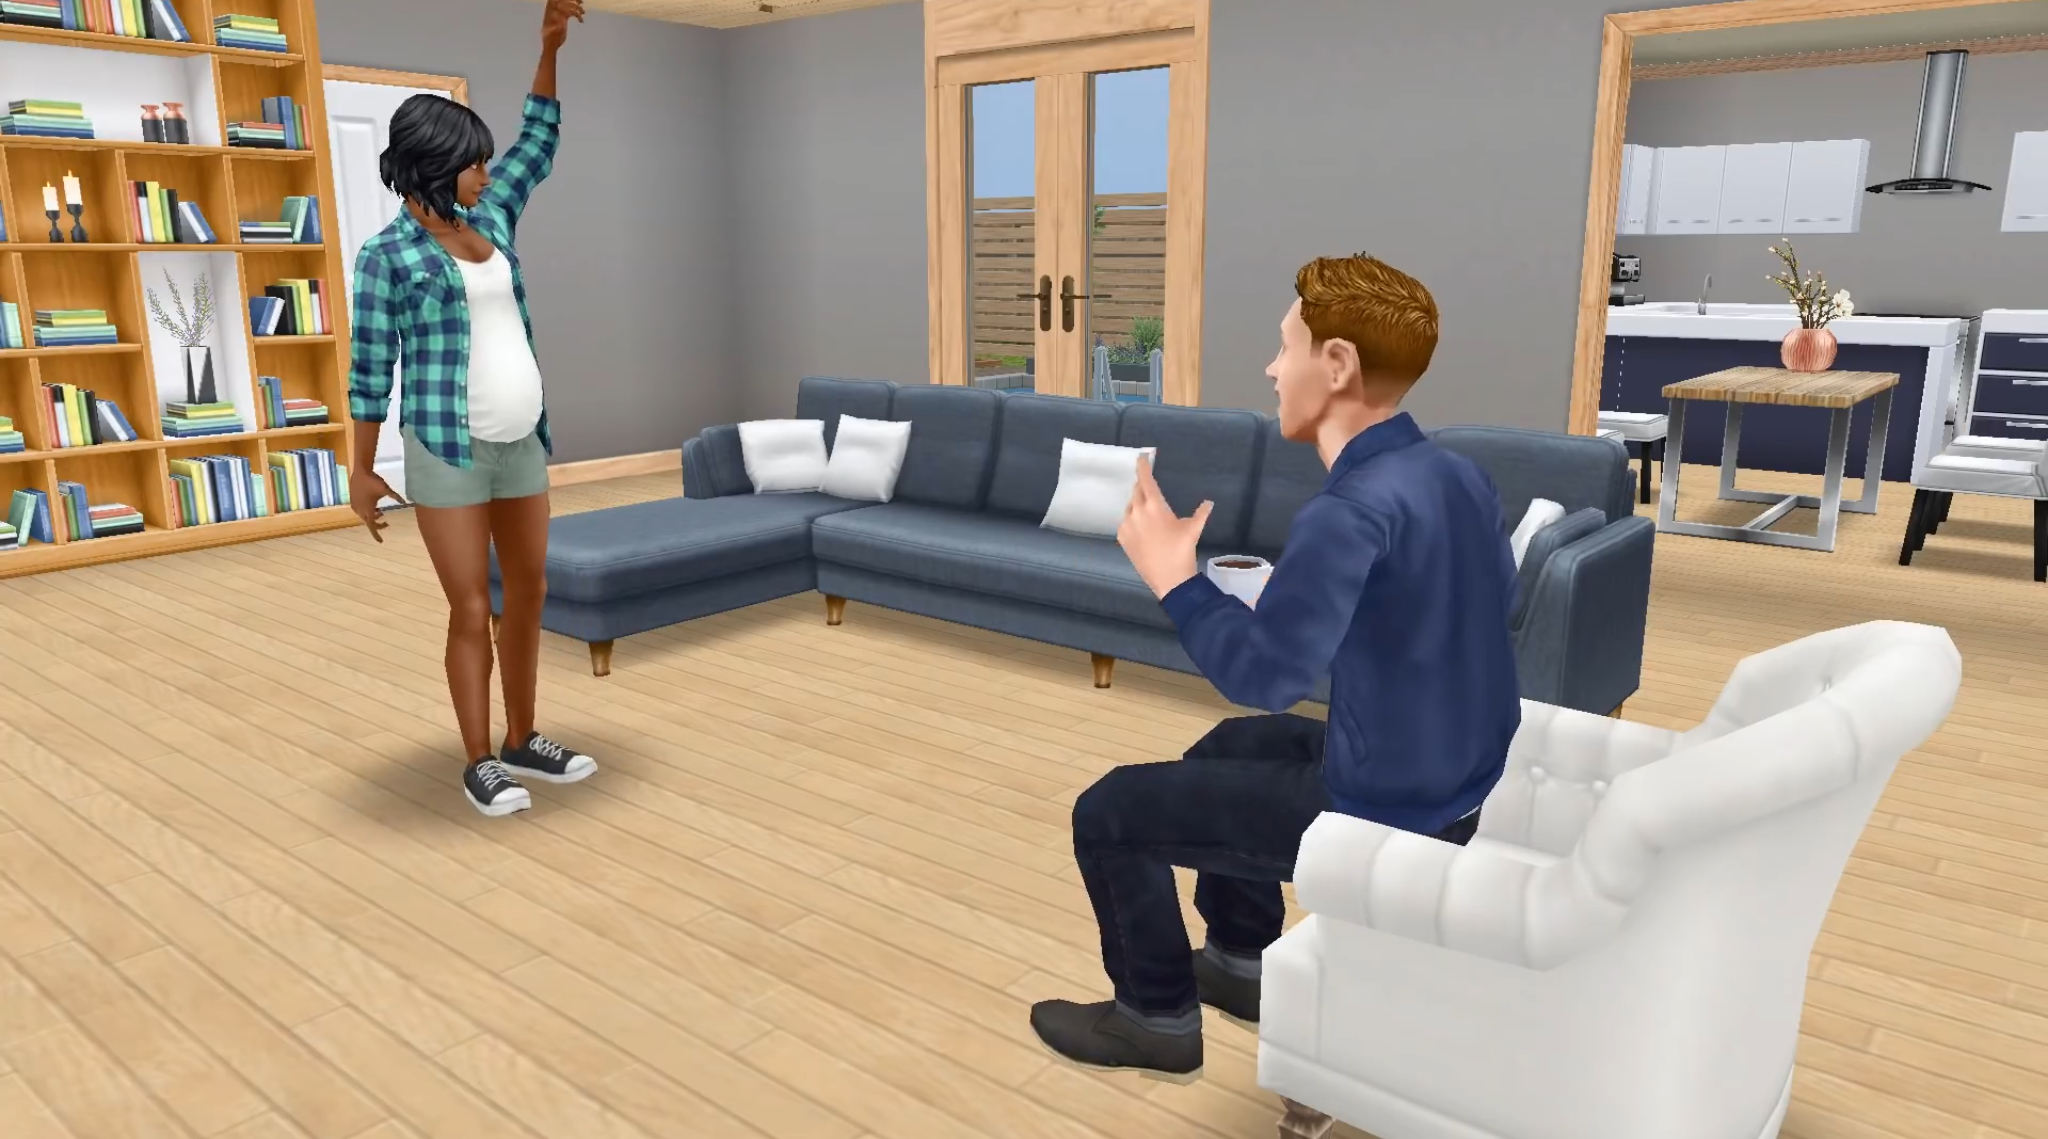 ‘The Sims Freeplay’ Adds Pregnancy Allowing You to Plan a Baby Shower